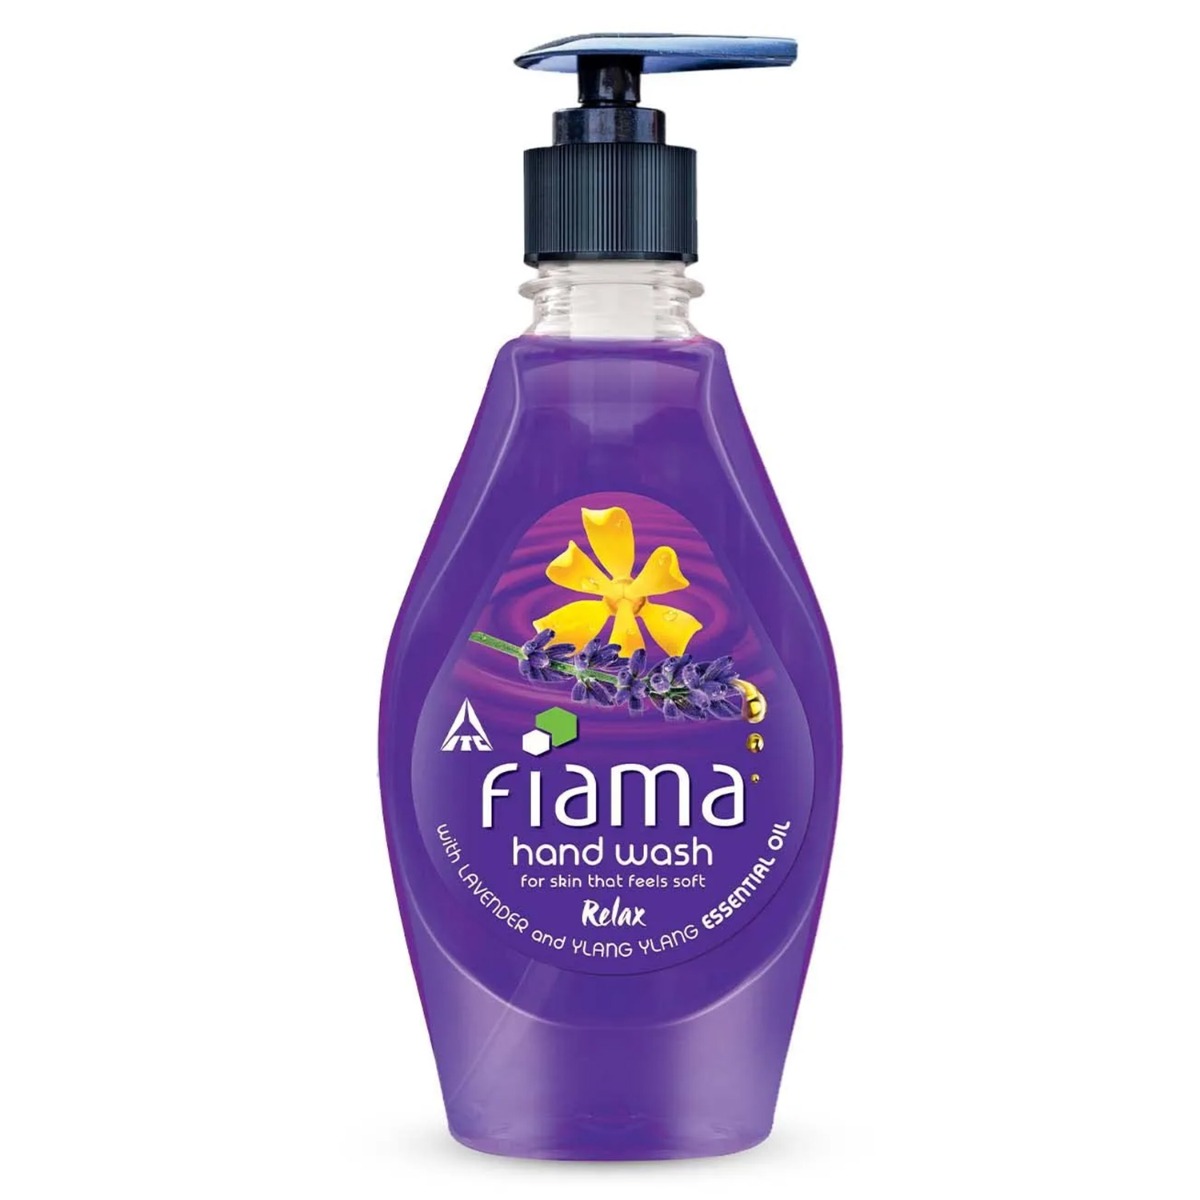 Fiama Relax Moisturising Hand Wash for Lavender and Ylang Ylang, 220ml